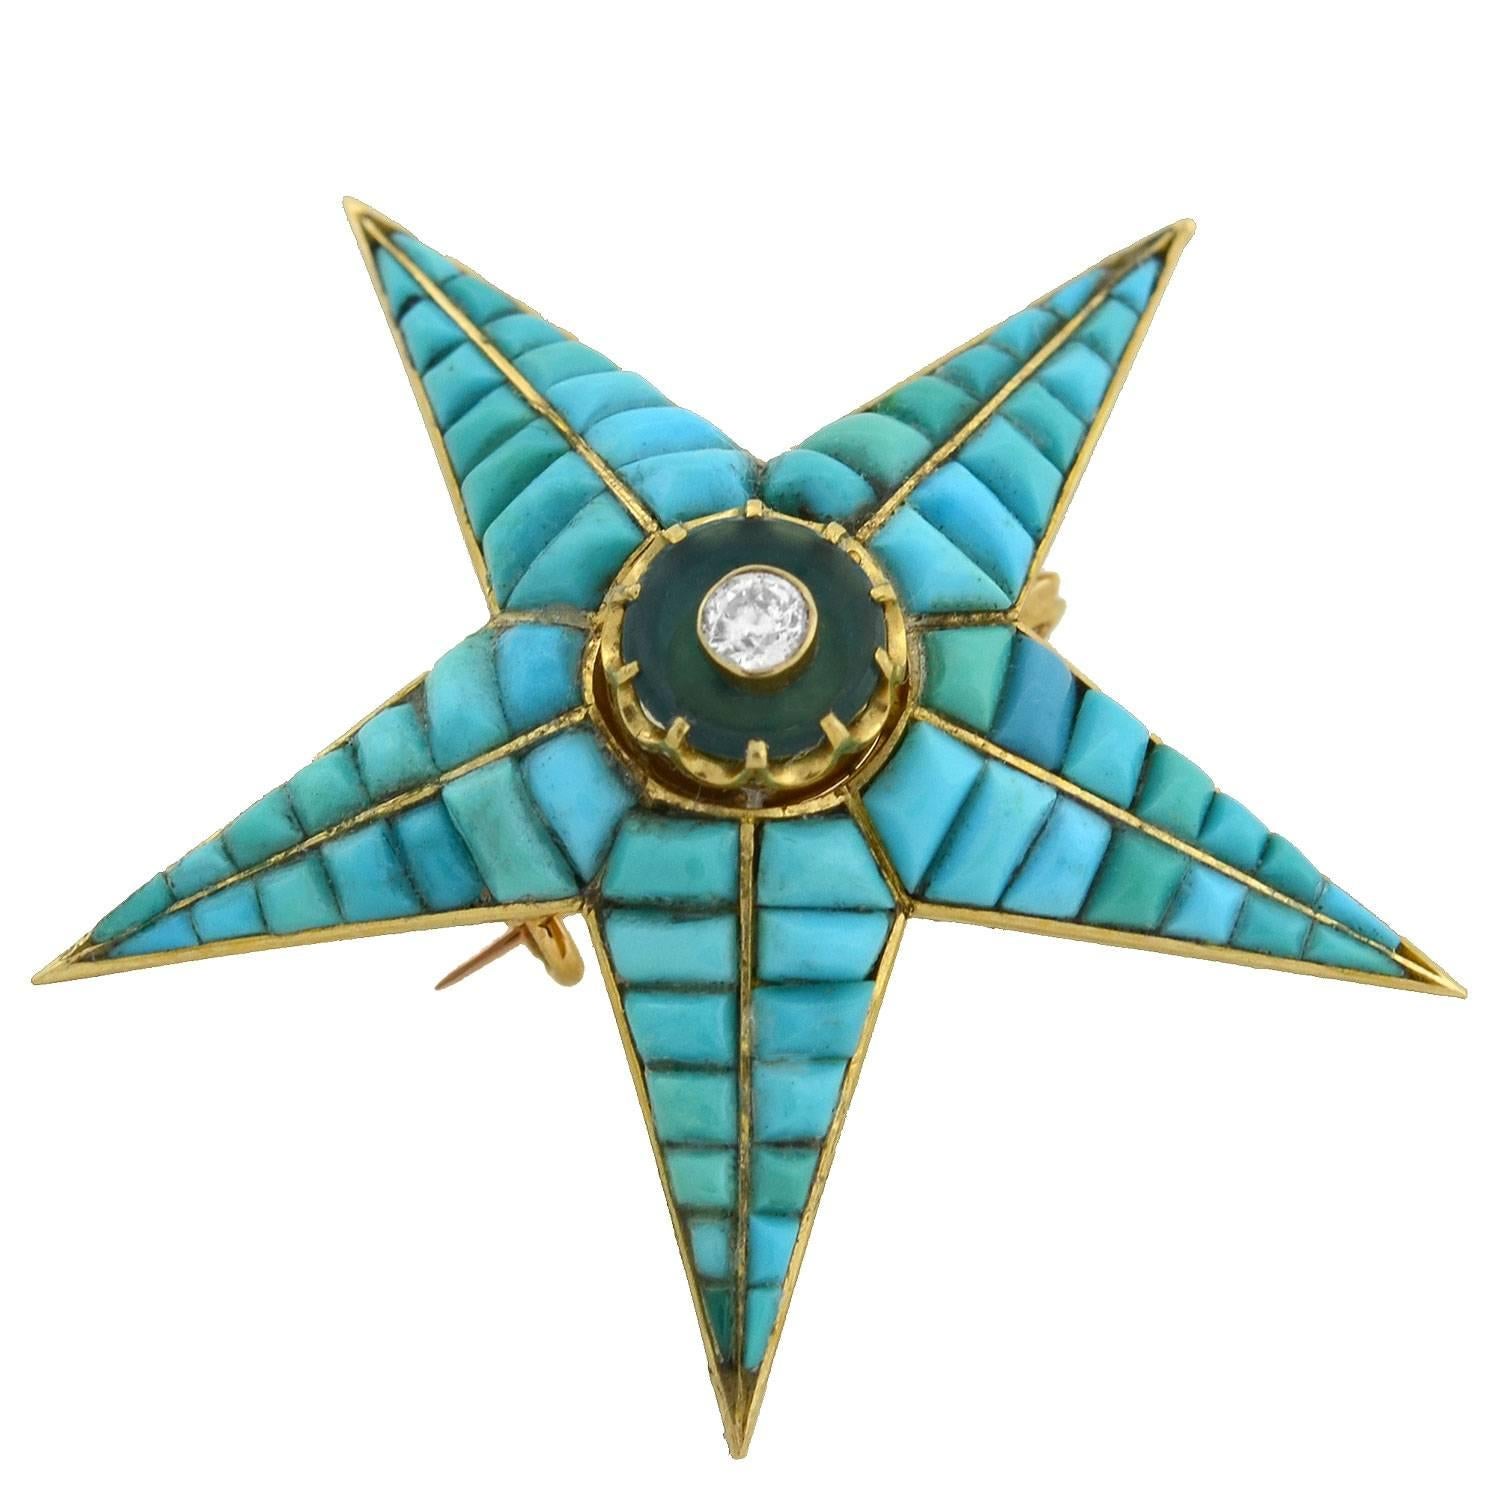 A gorgeous and unusual turquoise starburst from the Victorian (ca1880) era! This beautiful piece is crafted in vibrant 18kt yellow gold and has a convertible pin and pendant design. The stunning 5-point star design is convex in shape, and encrusted